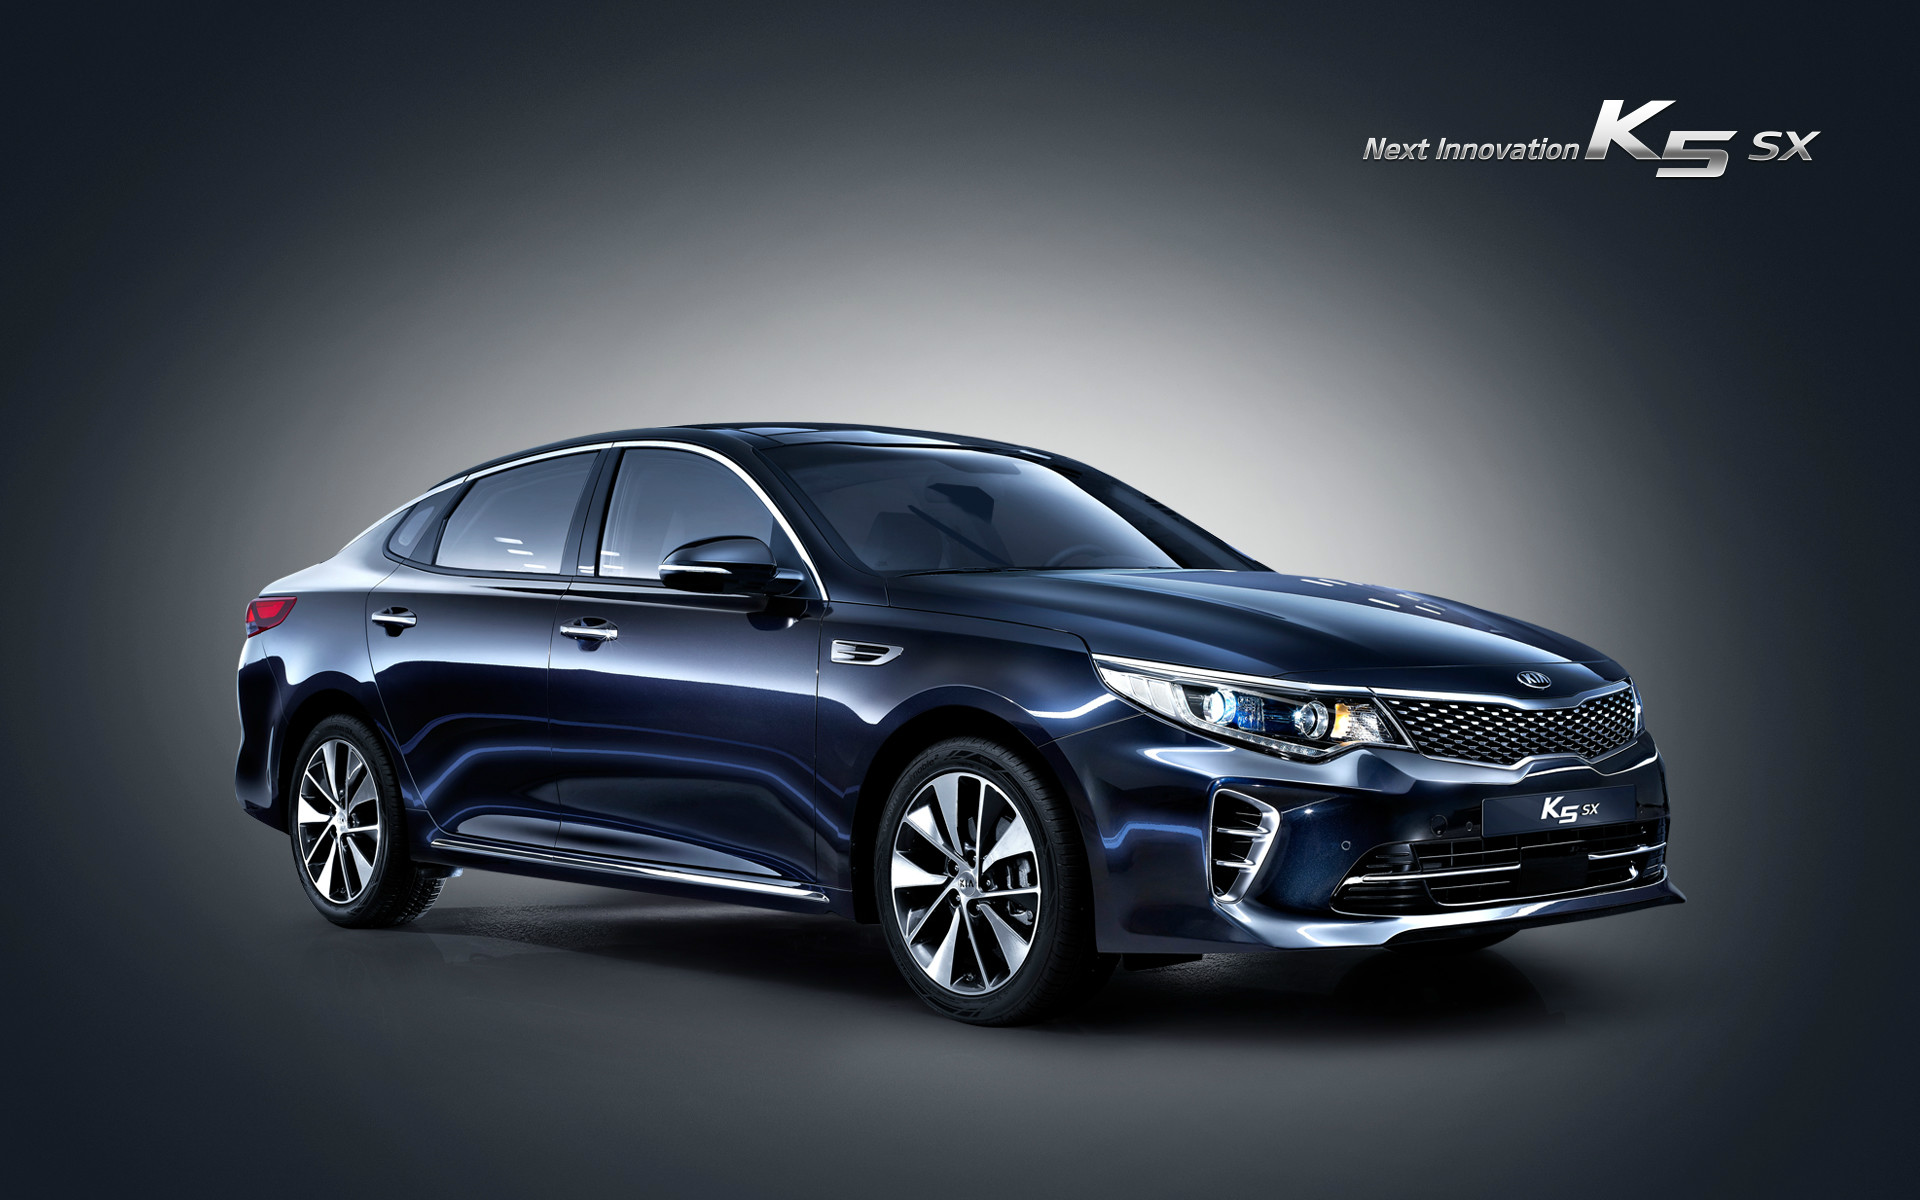 New Kia K5 Launched in South Korea